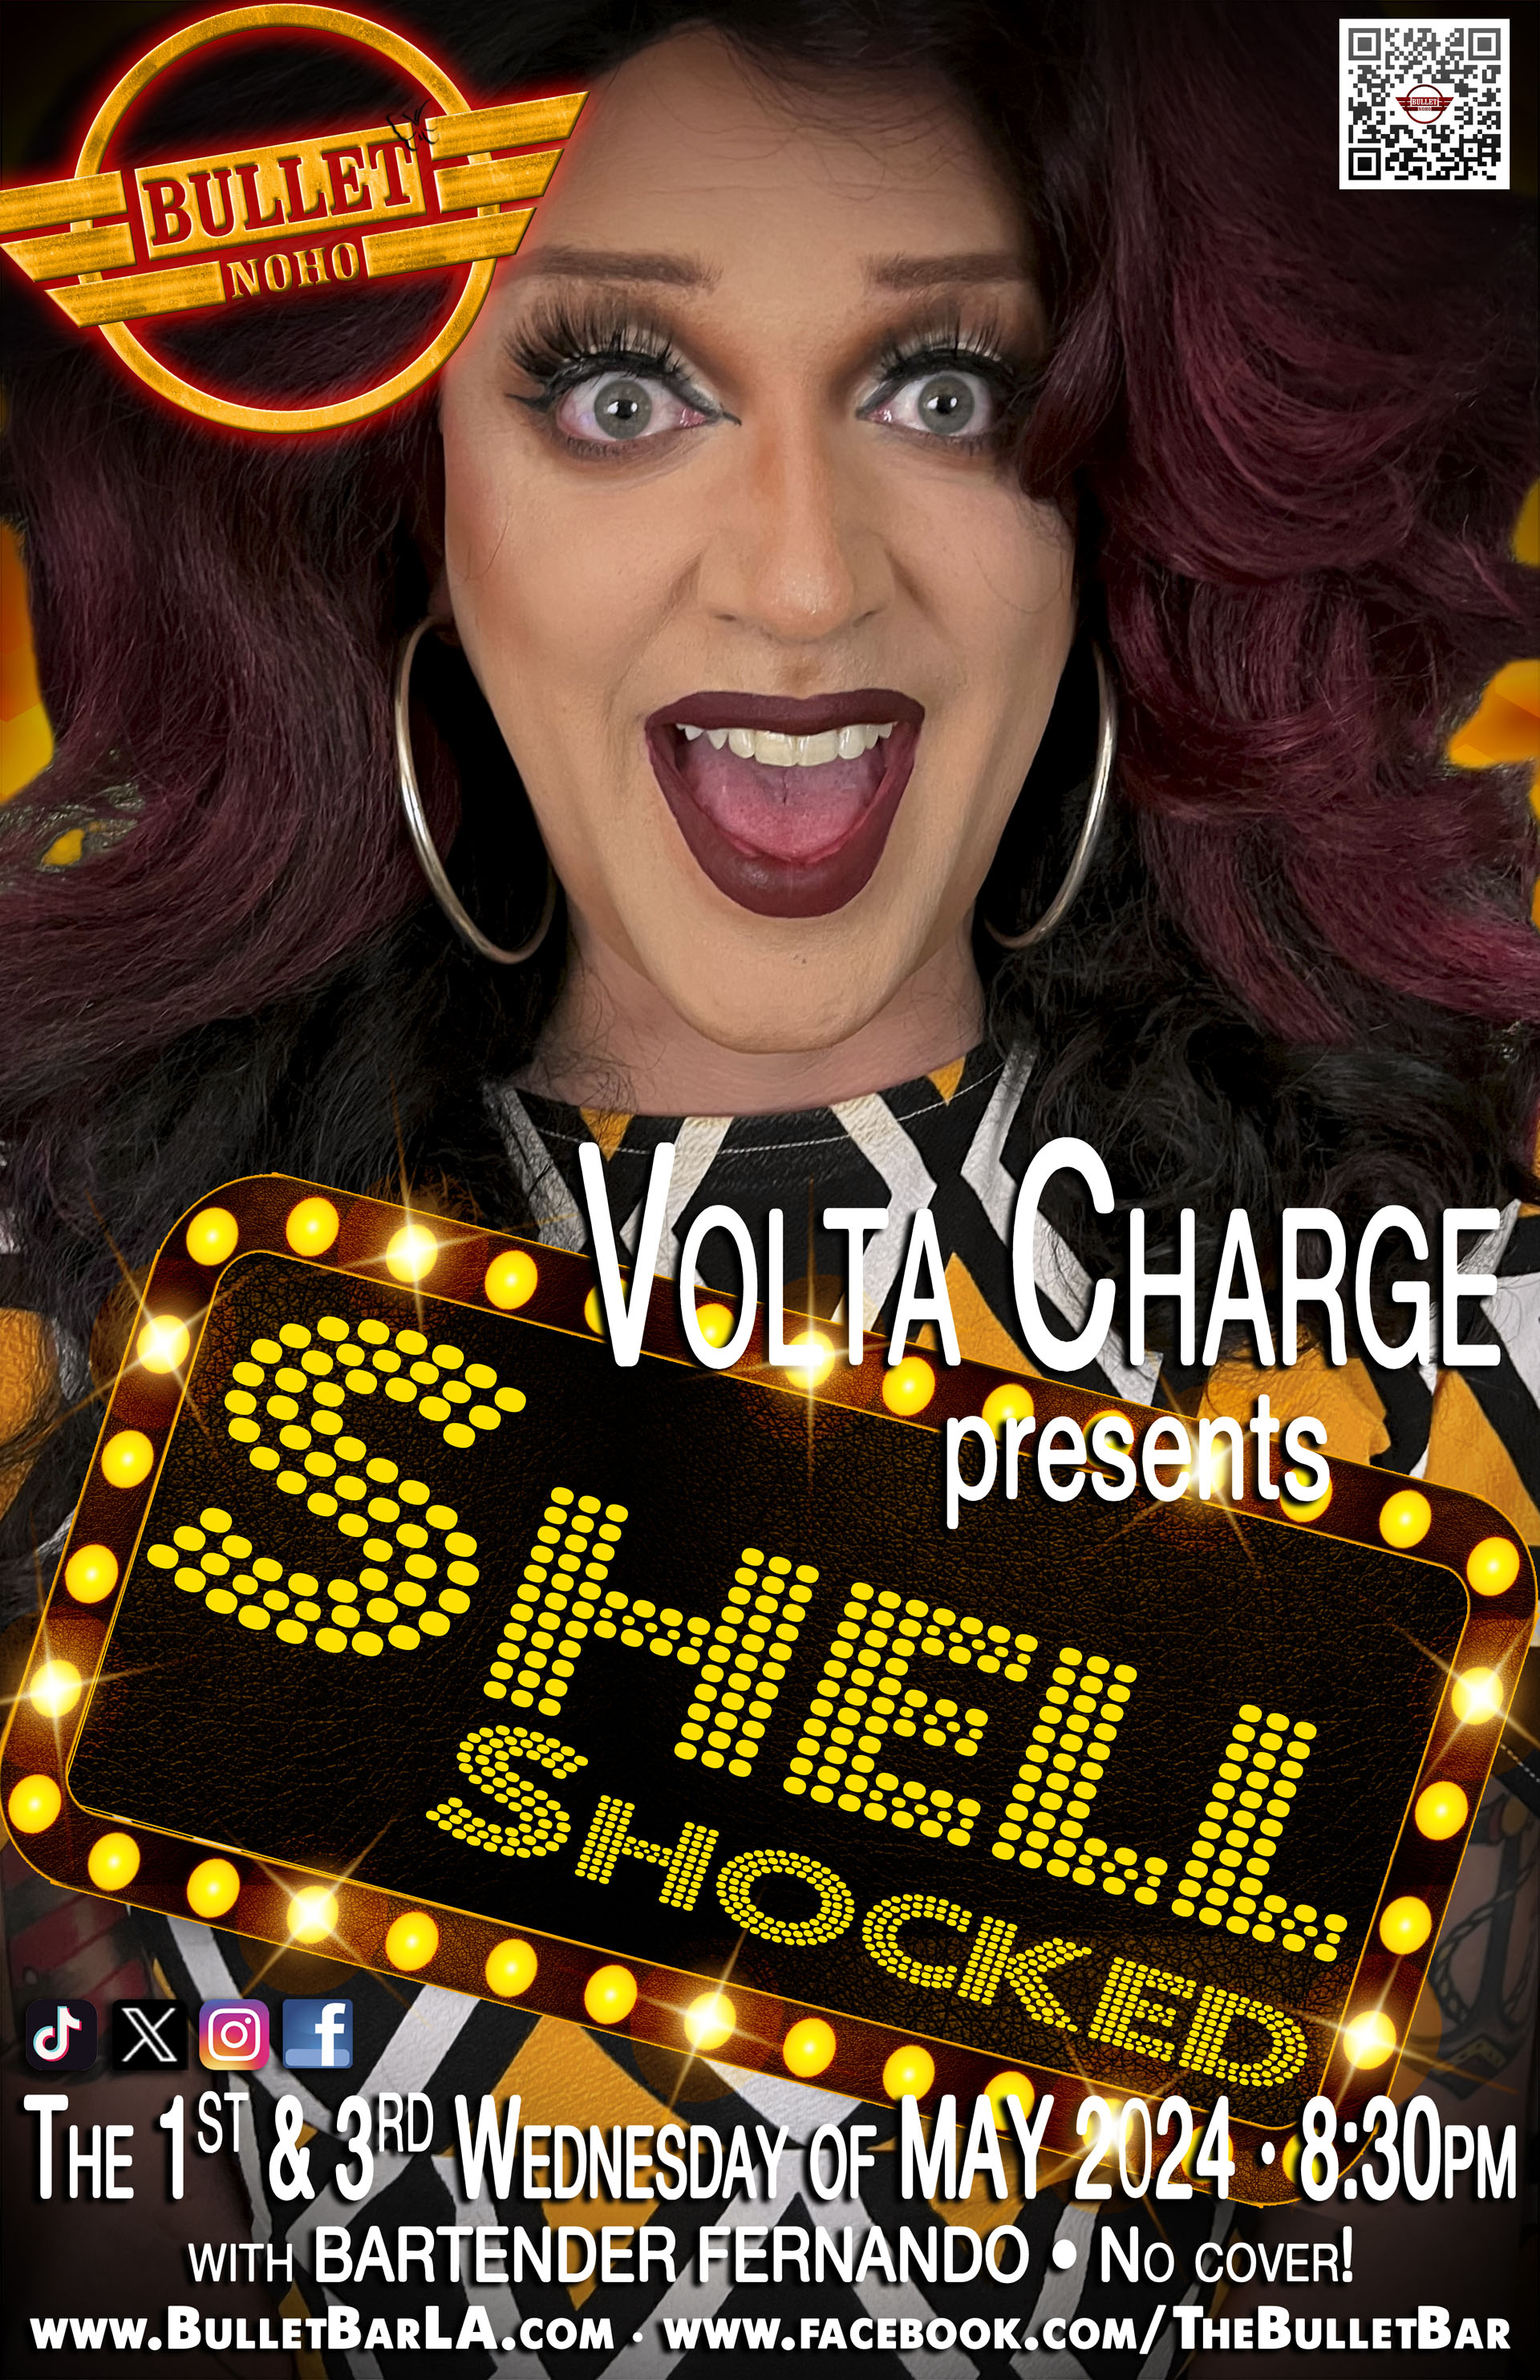 THE BULLET BAR & VOLTA CHARGE Present SHELL SHOCKED: Wednesday, 05/01/23 at 8:30 PM! No Cover!